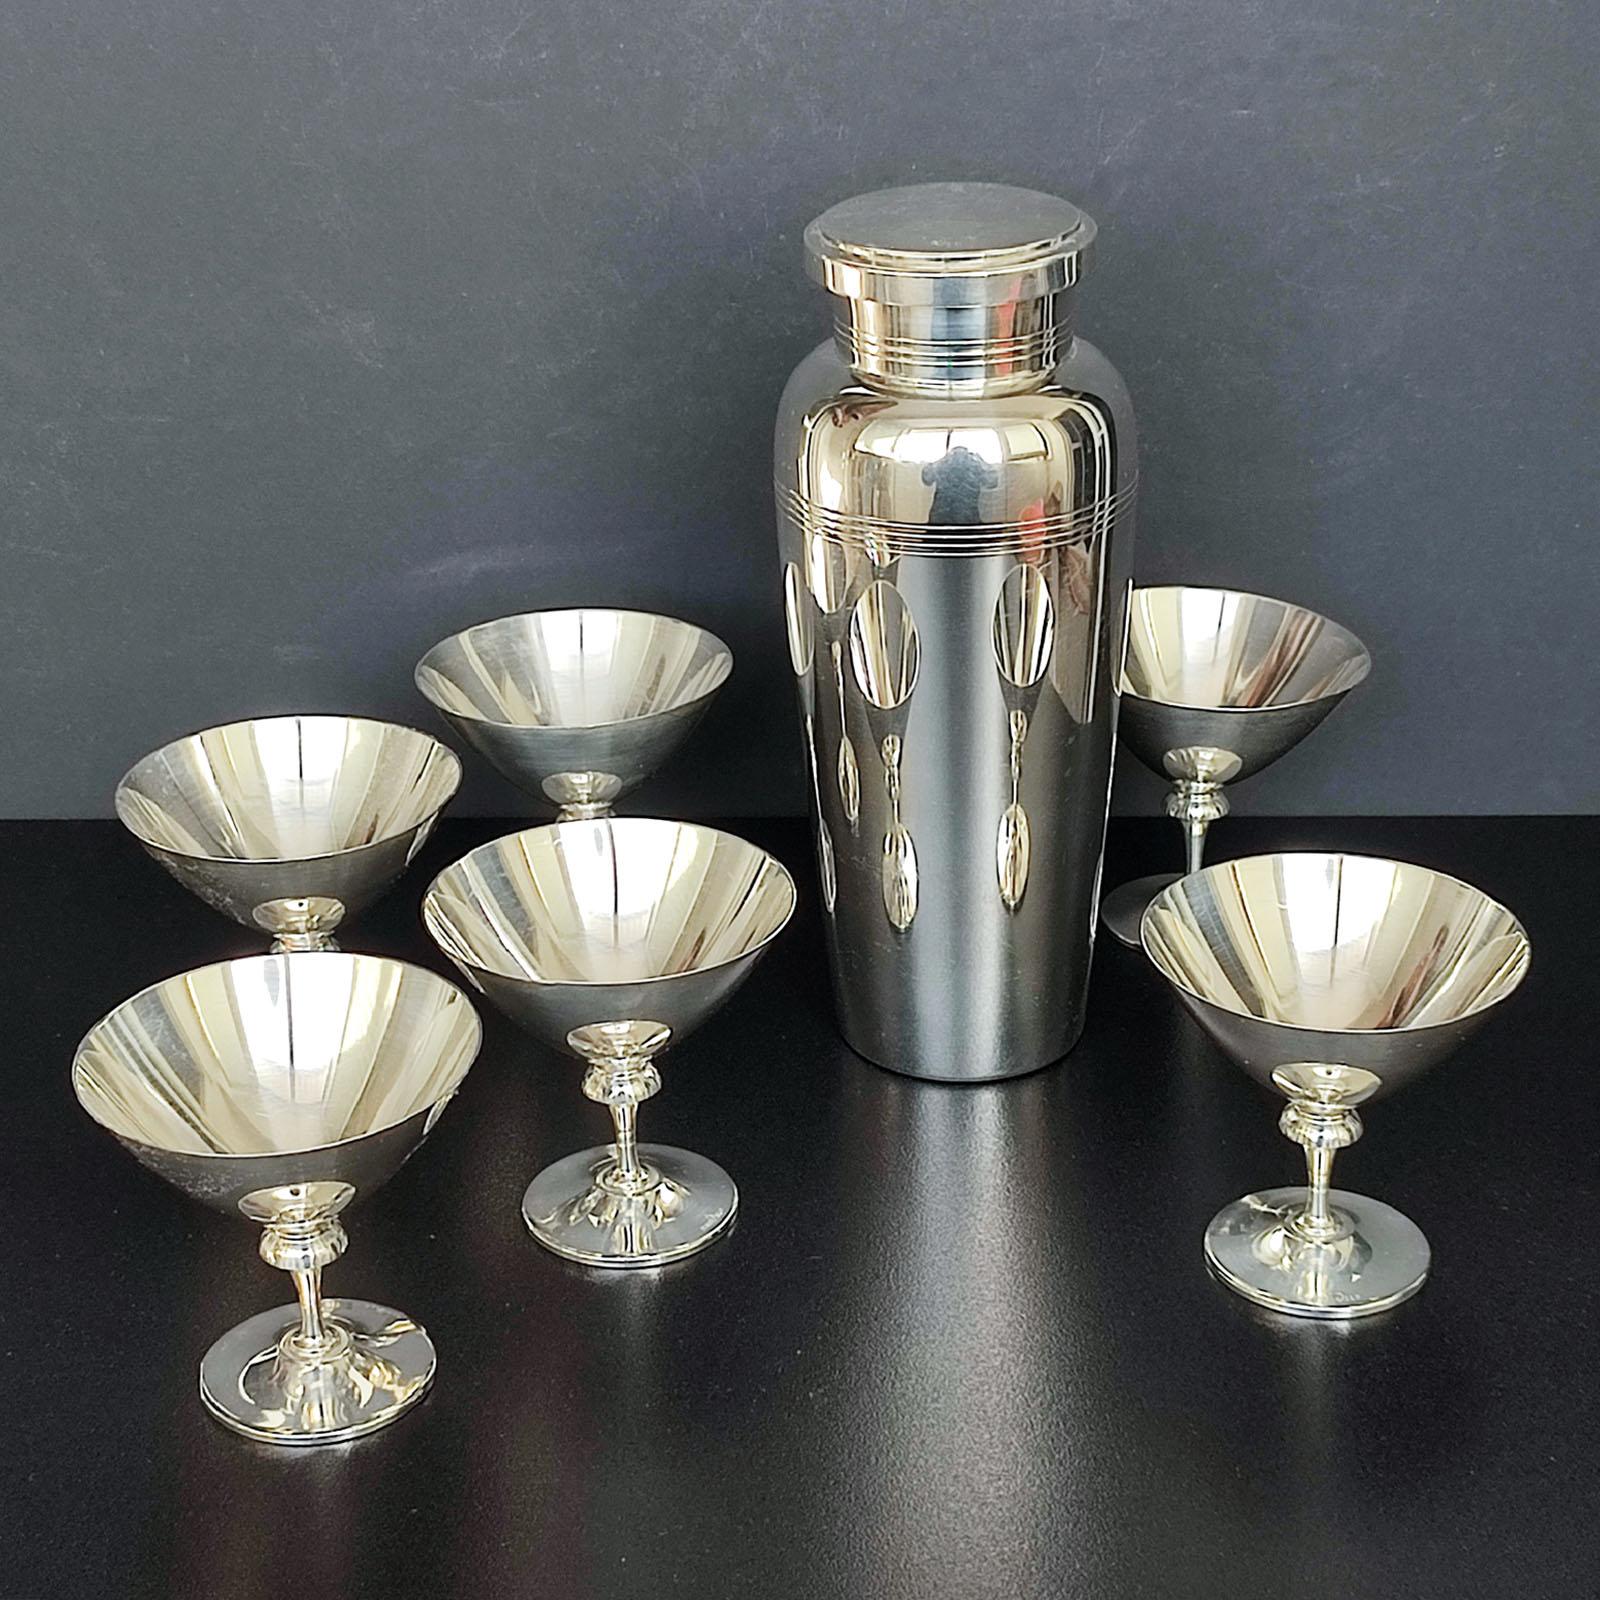 Art Deco Cocktail Shaker, CG Hallberg and Six Glasses, Folke Arström, GAB, Sweden
Wonderful, silver-plated Art Deco cocktail shaker and six martini glasses. Each piece stamped. In excellent condition according to their age, these items are a great